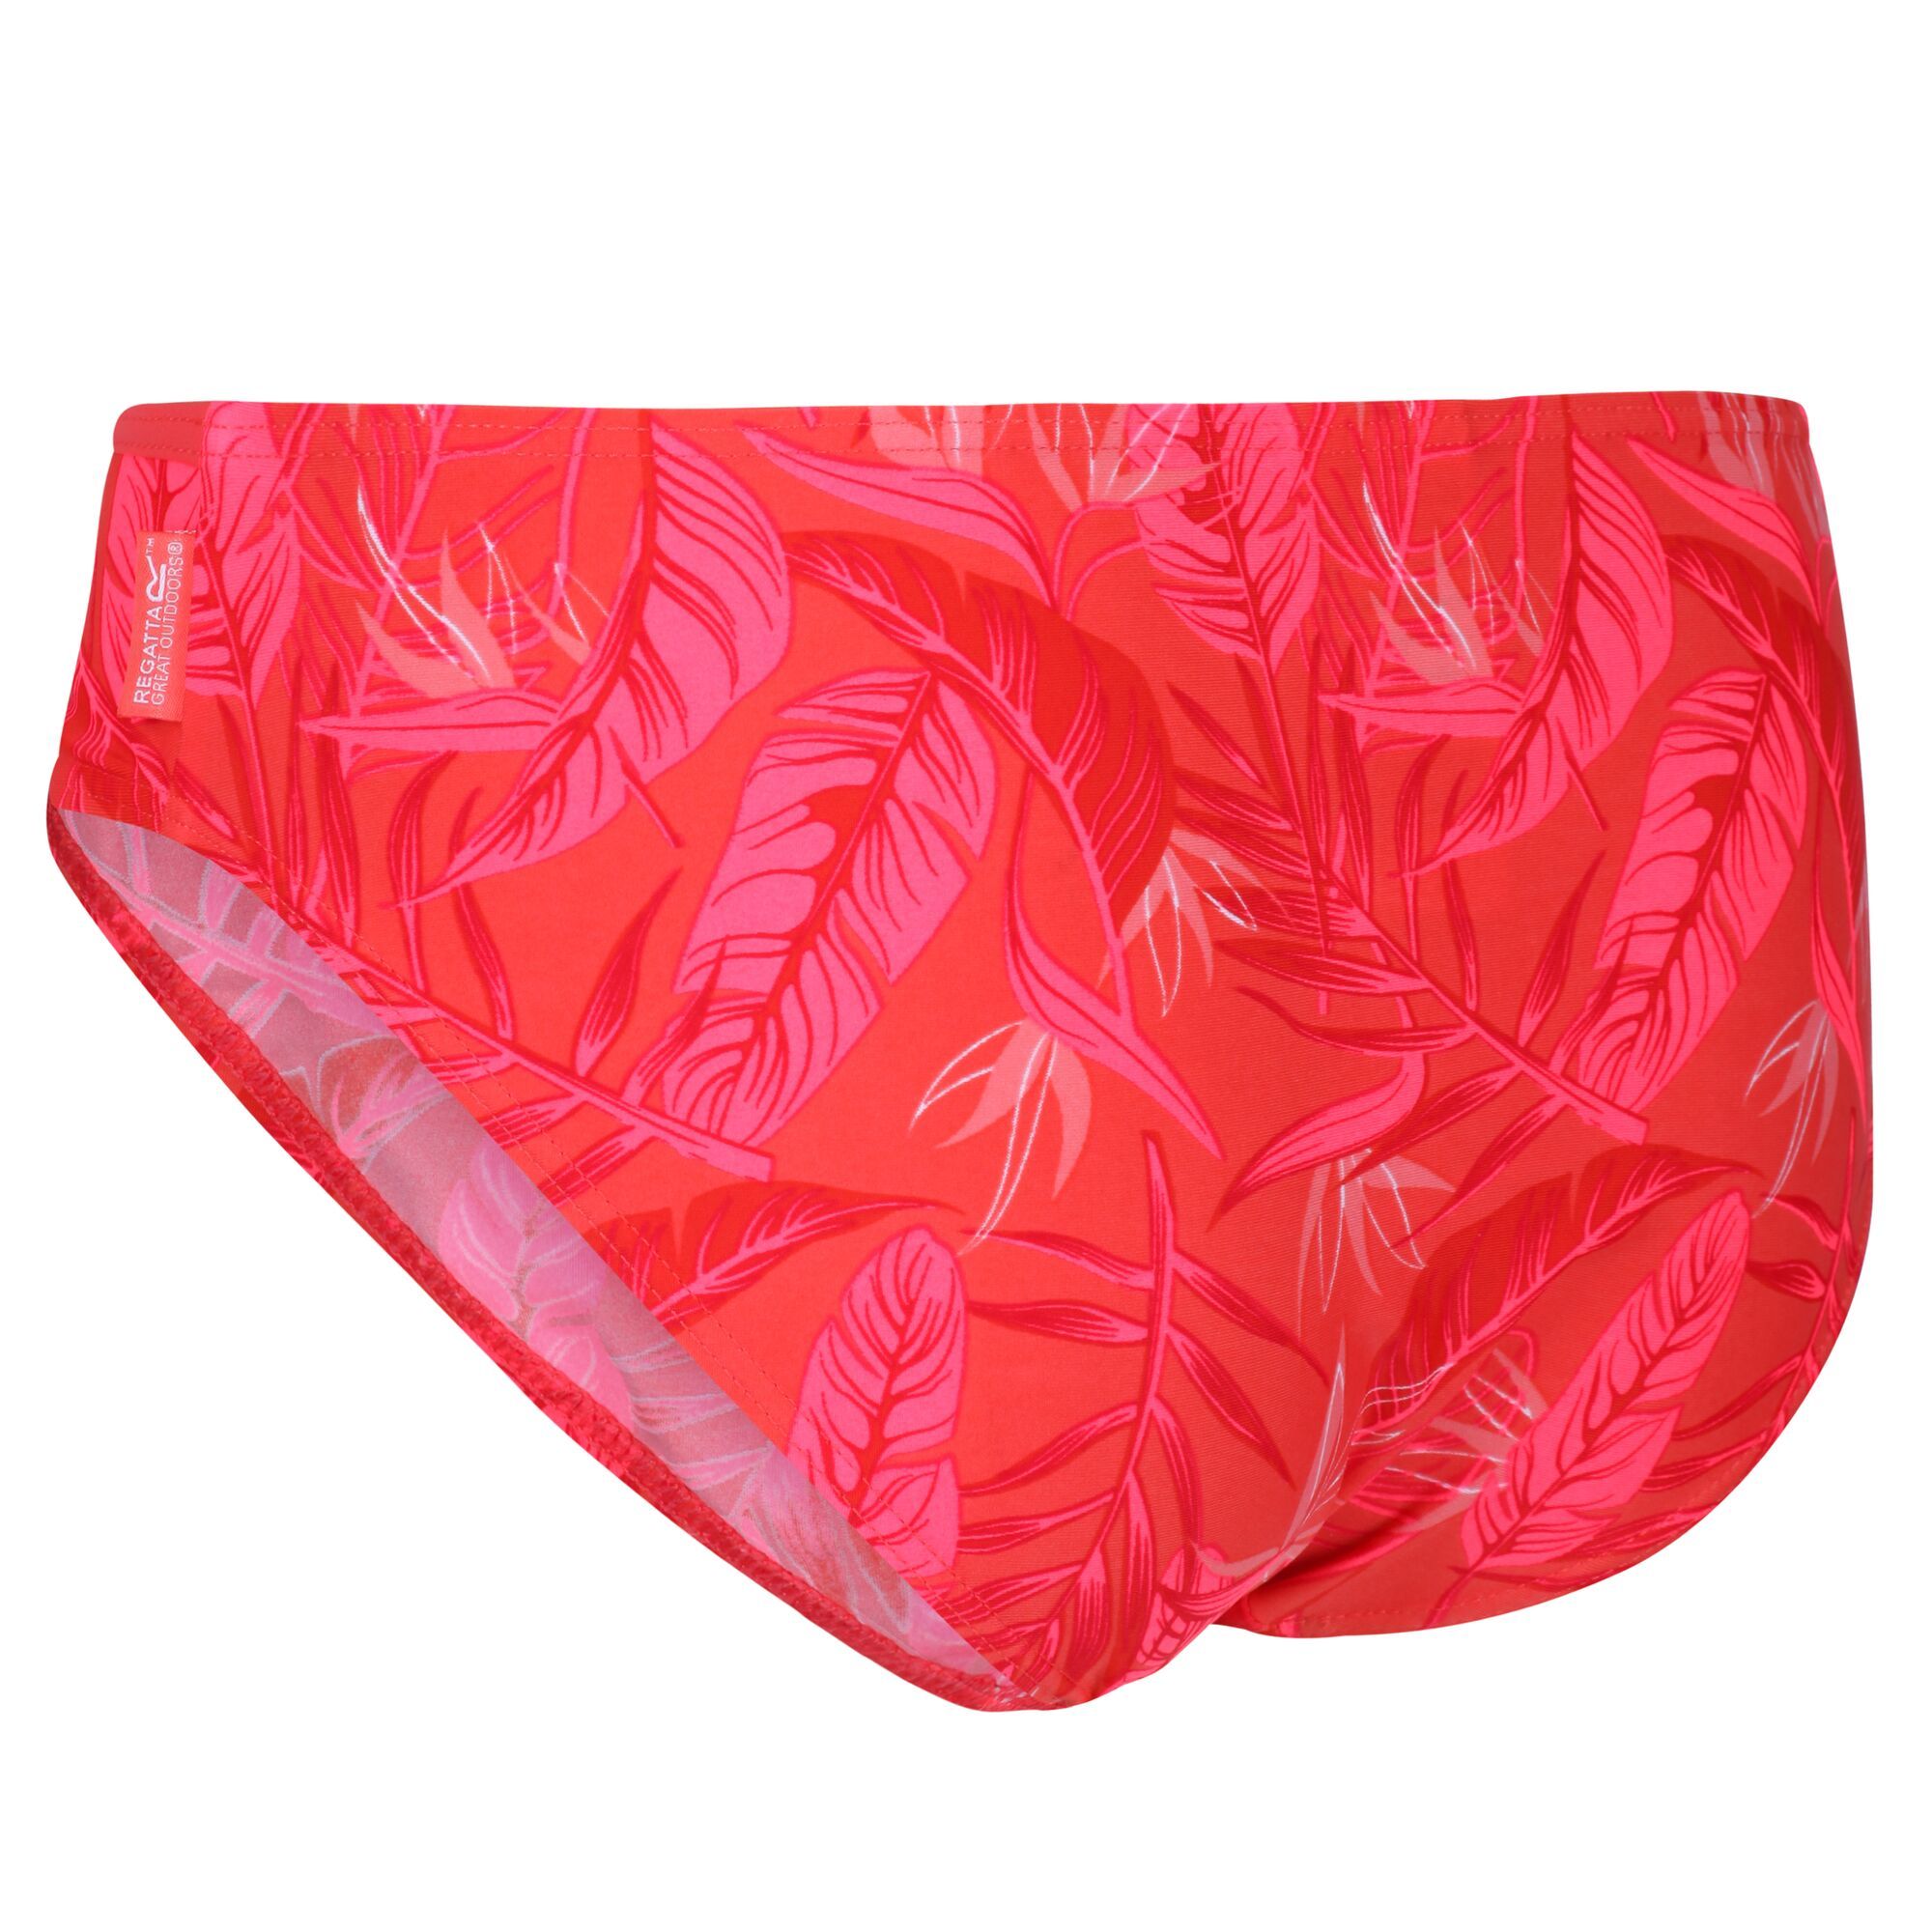 82% polyamide, 18% elastane. Mix and match your favourite styles from the Regatta Aceana Collection to create your perfect two-piece swimsuit. The Aceana Bikini Brief is made of soft-touch stretch fabric cut with a flattering high leg and ruching details around the side. With a small Regatta tab on the left hip. Regatta Womens sizing (waist approx): 6 (23in/58cm), 8 (25in/63cm), 10 (27in/68cm), 12 (29in/74cm), 14 (31in/79cm), 16 (33in/84cm), 18 (36in/91cm), 20 (38in/96cm), 22 (41in/104cm), 24 (43in/109cm), 26 (45in/114cm), 28 (47in/119cm), 30 (49in/124cm), 32 (51in/129cm), 34 (53in/135cm), 36 (55in/140cm).